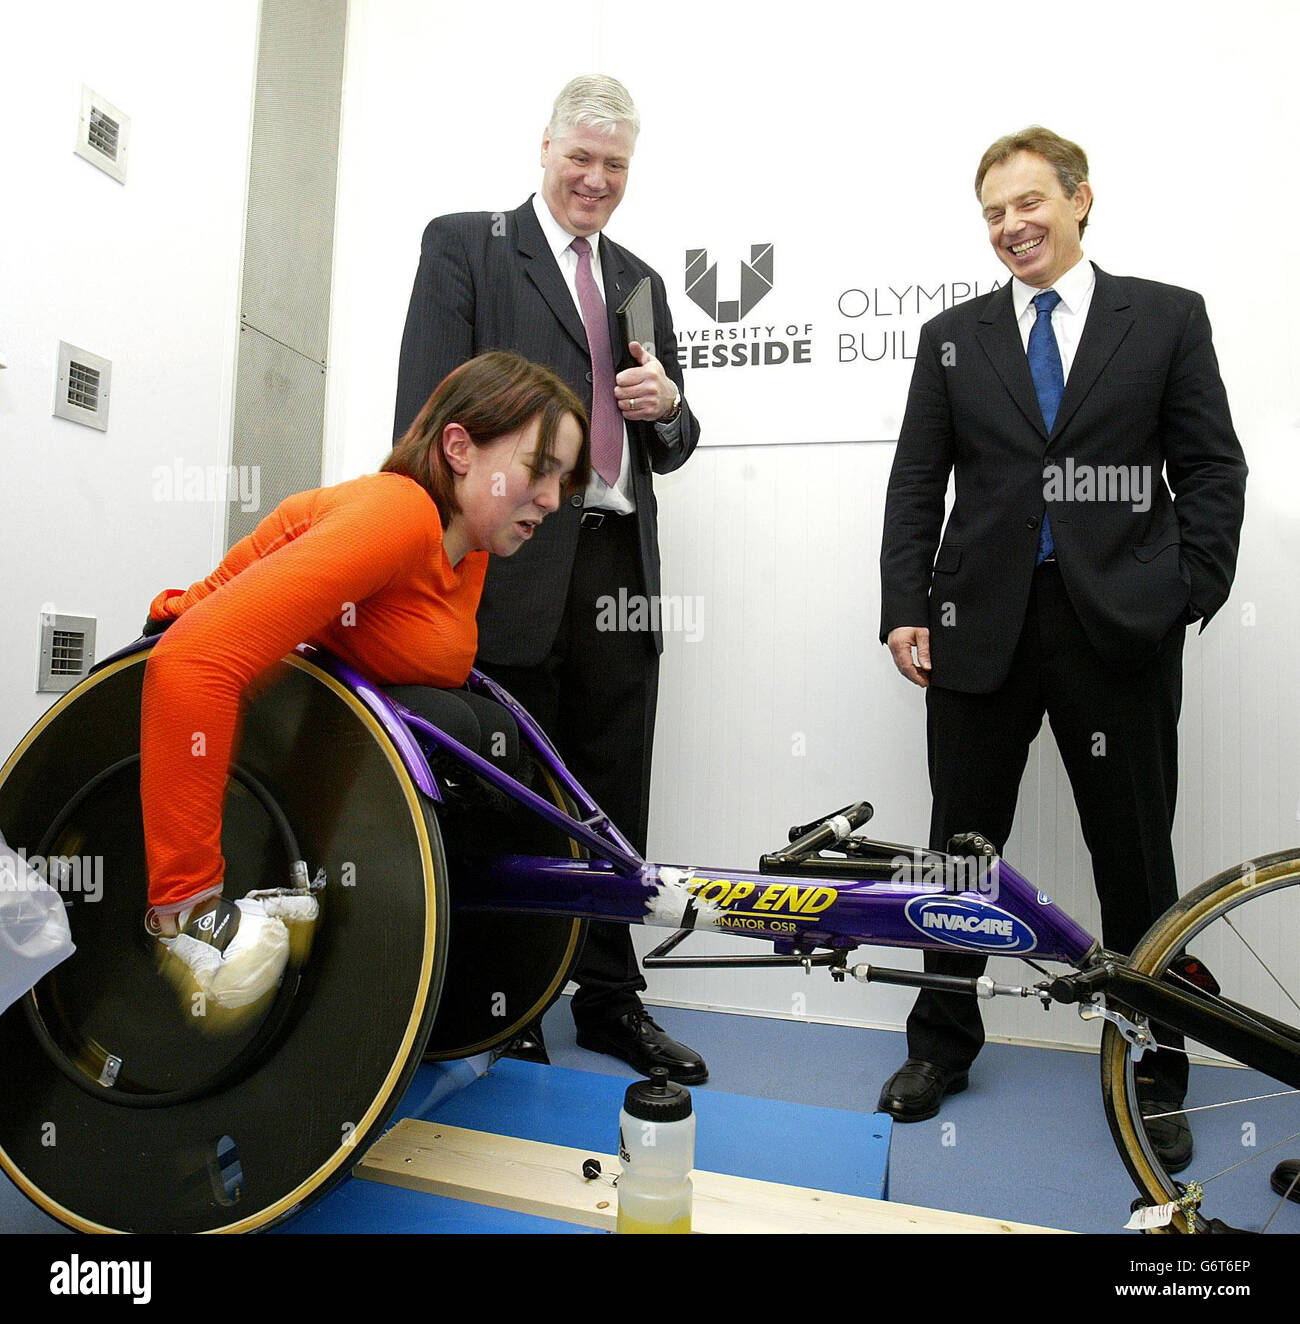 University Vice Chancellor Professor Graham Henderson stands with British Prime Minister Tony Blair (right) as he watches disabled athlete Sarah Loughran train, in the Environmental Chamber, during his visit to the Olympia Building at the University of Teeside in Middlesbrough. Early, in a keynote speech in his constituency, Mr Blair passionately defended the war in Iraq and claimed the twin towers attack of September 11 had come as a 'revelation' that convinced him of the need to tackle rogue states. Stock Photo